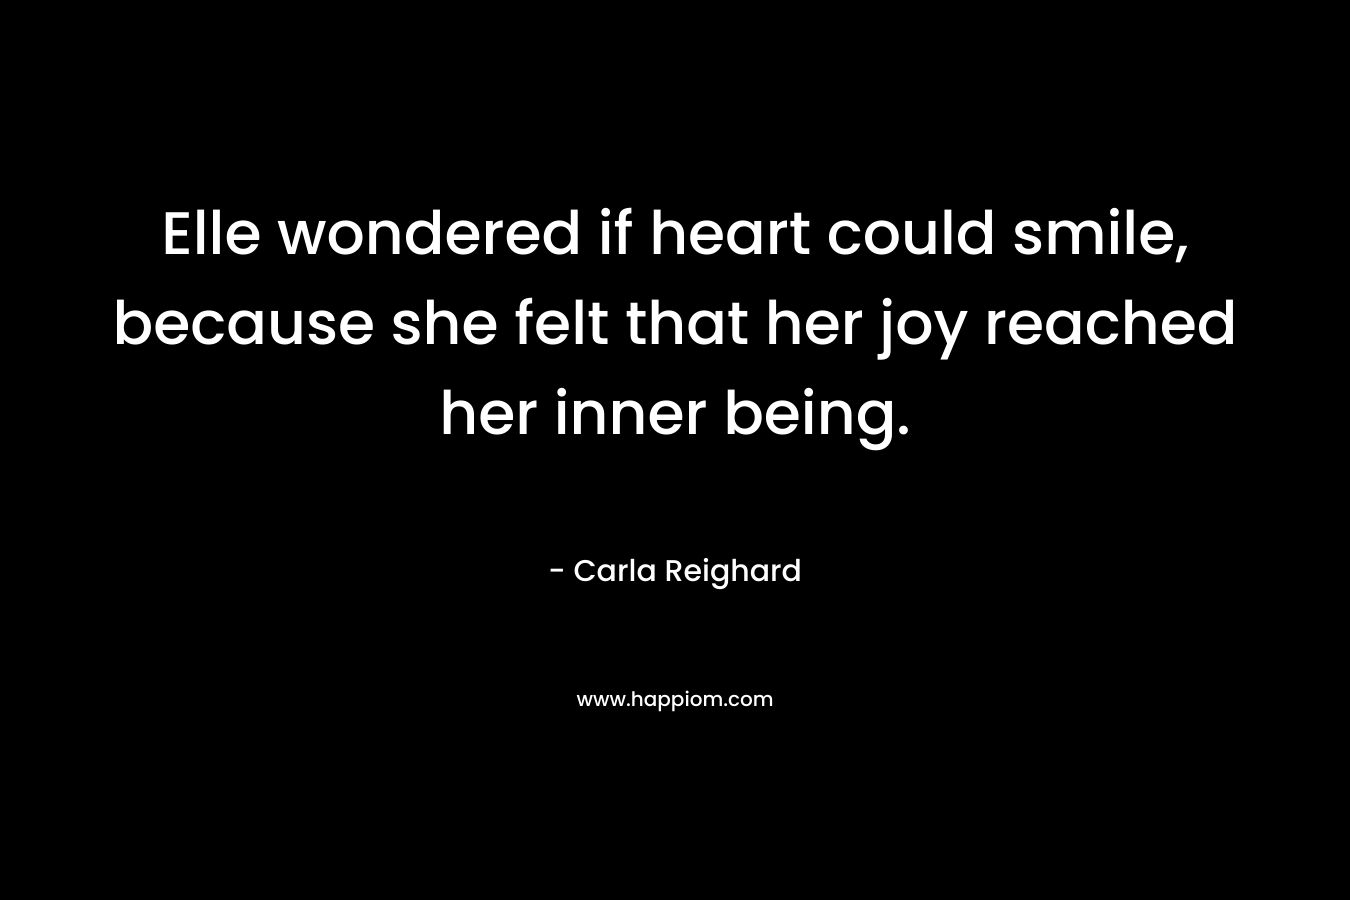 Elle wondered if heart could smile, because she felt that her joy reached her inner being. – Carla Reighard